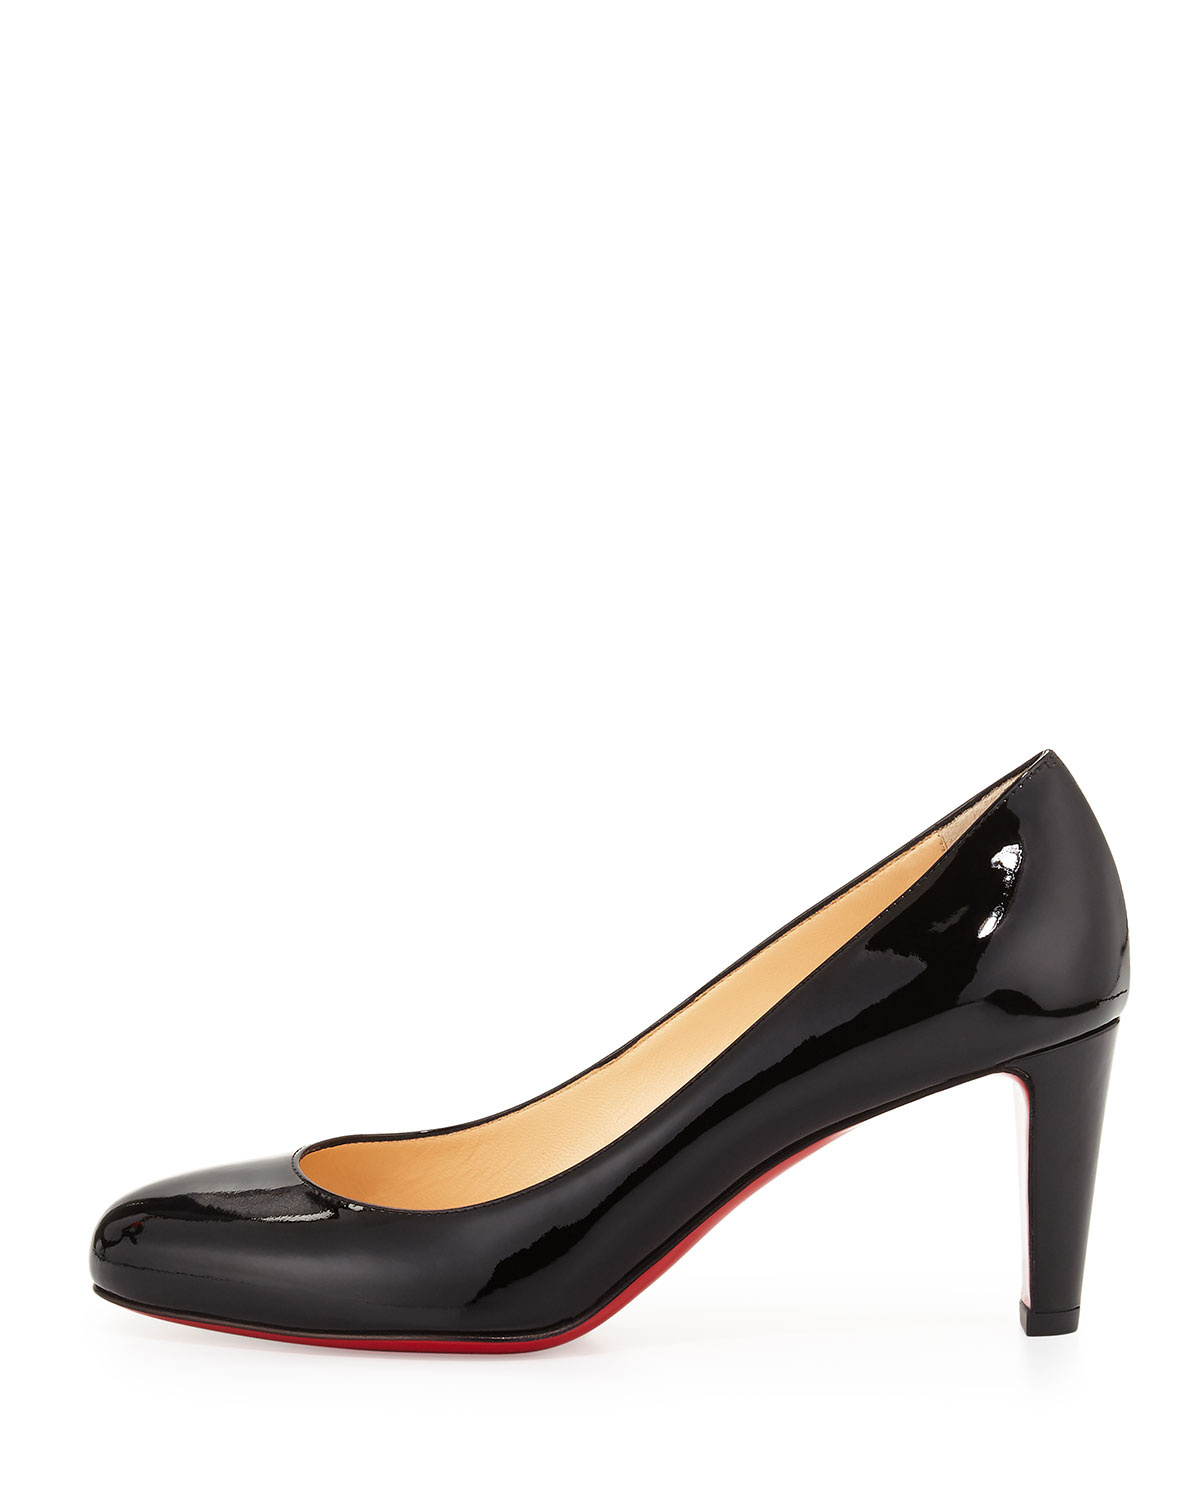 Christian louboutin Fififa Patent Red Sole Pump in Black (red) | Lyst